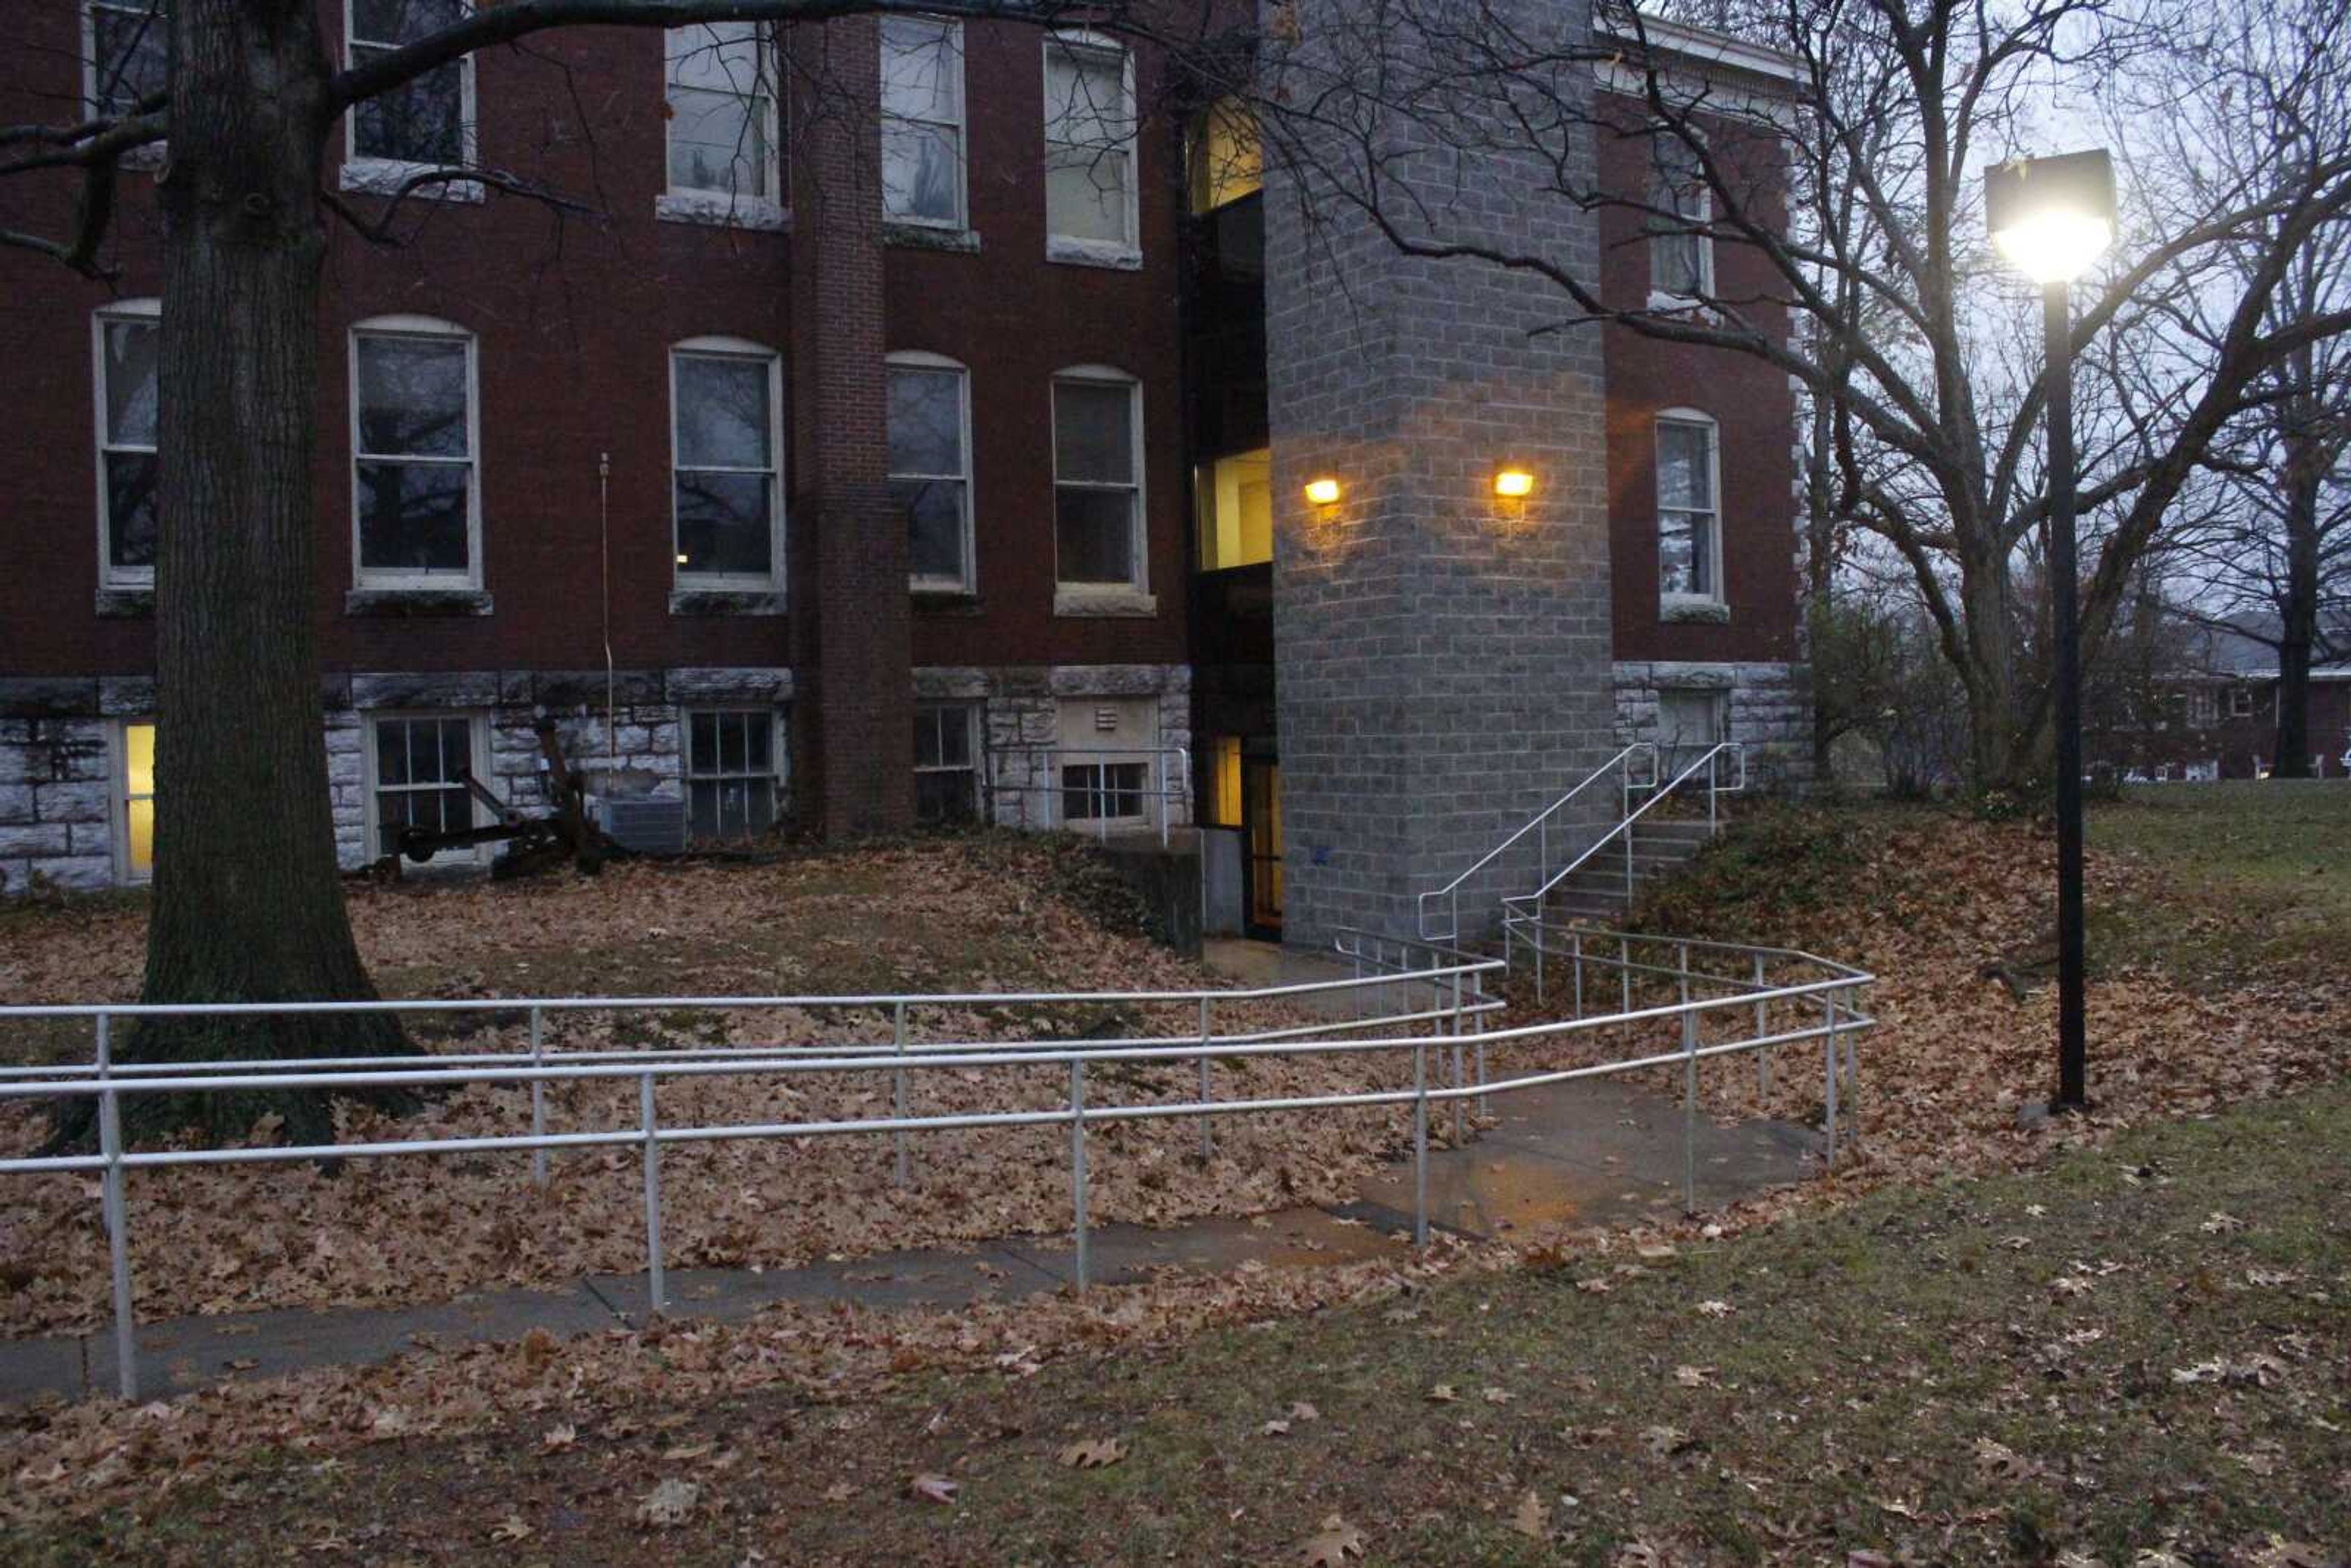 Ramps are located at several campus buildings to help with accessibility. This ramp leads to the elevator and stairs behind the Art Building.